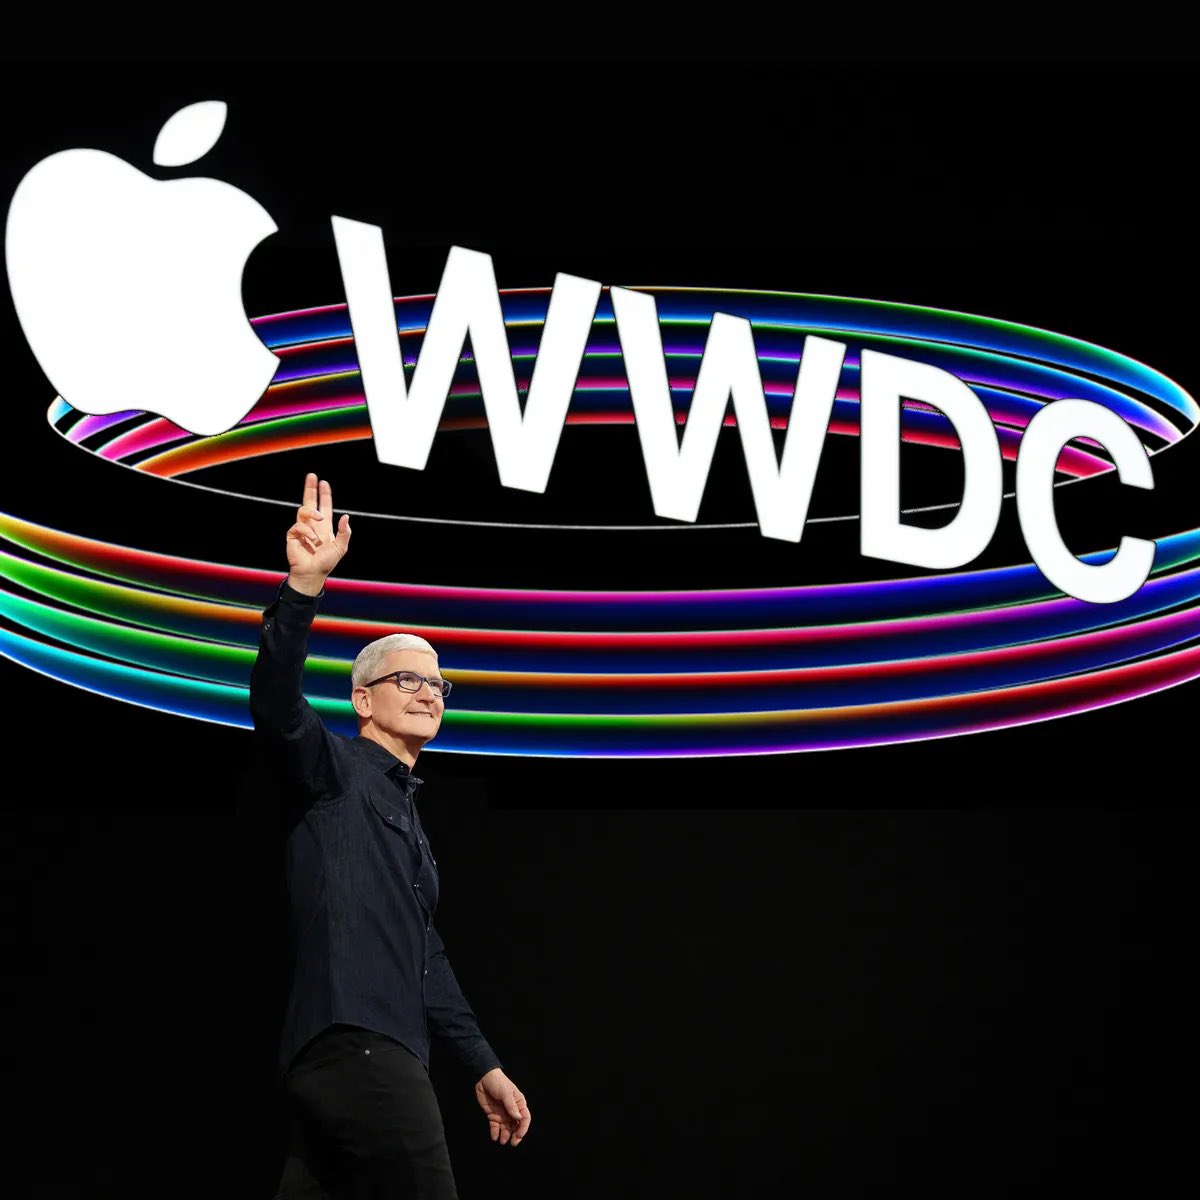 Apple announced WWDC2023 last year on March 29th, we could see an announcement for #WWDC2024 coming from Apple in less than a month.